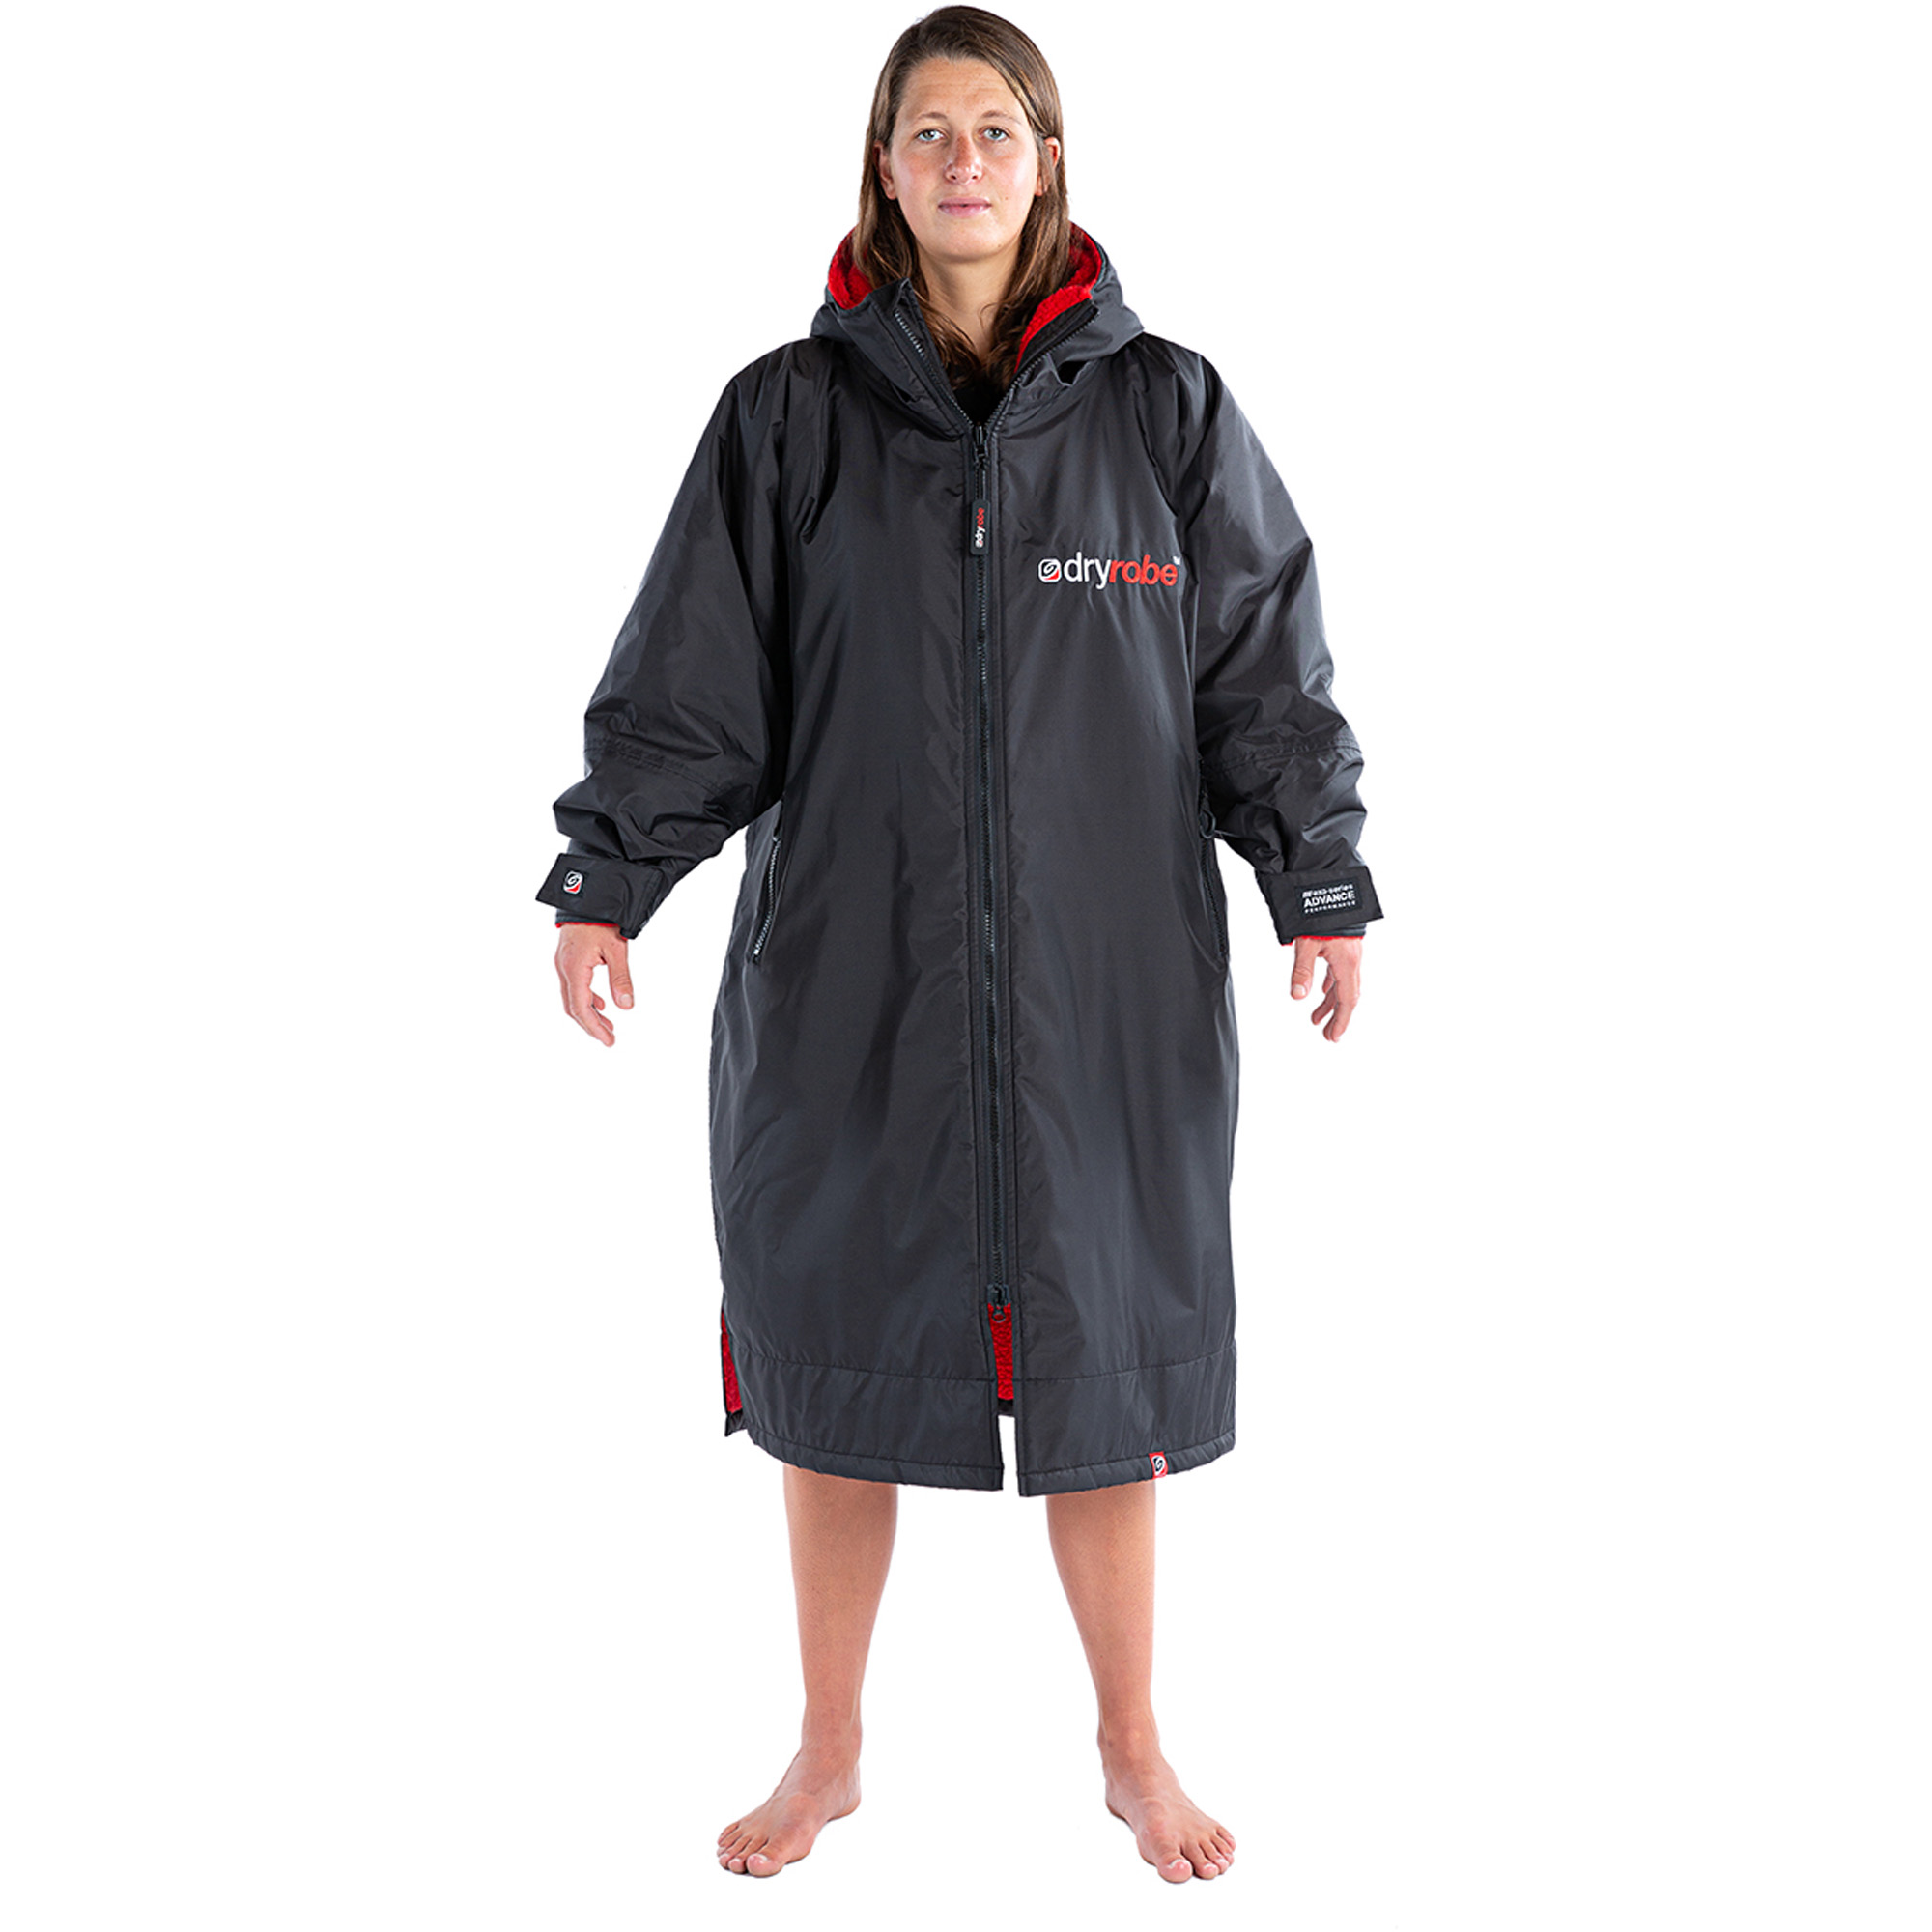 dryrobe Advance Long Sleeve Towelling Changing Robe